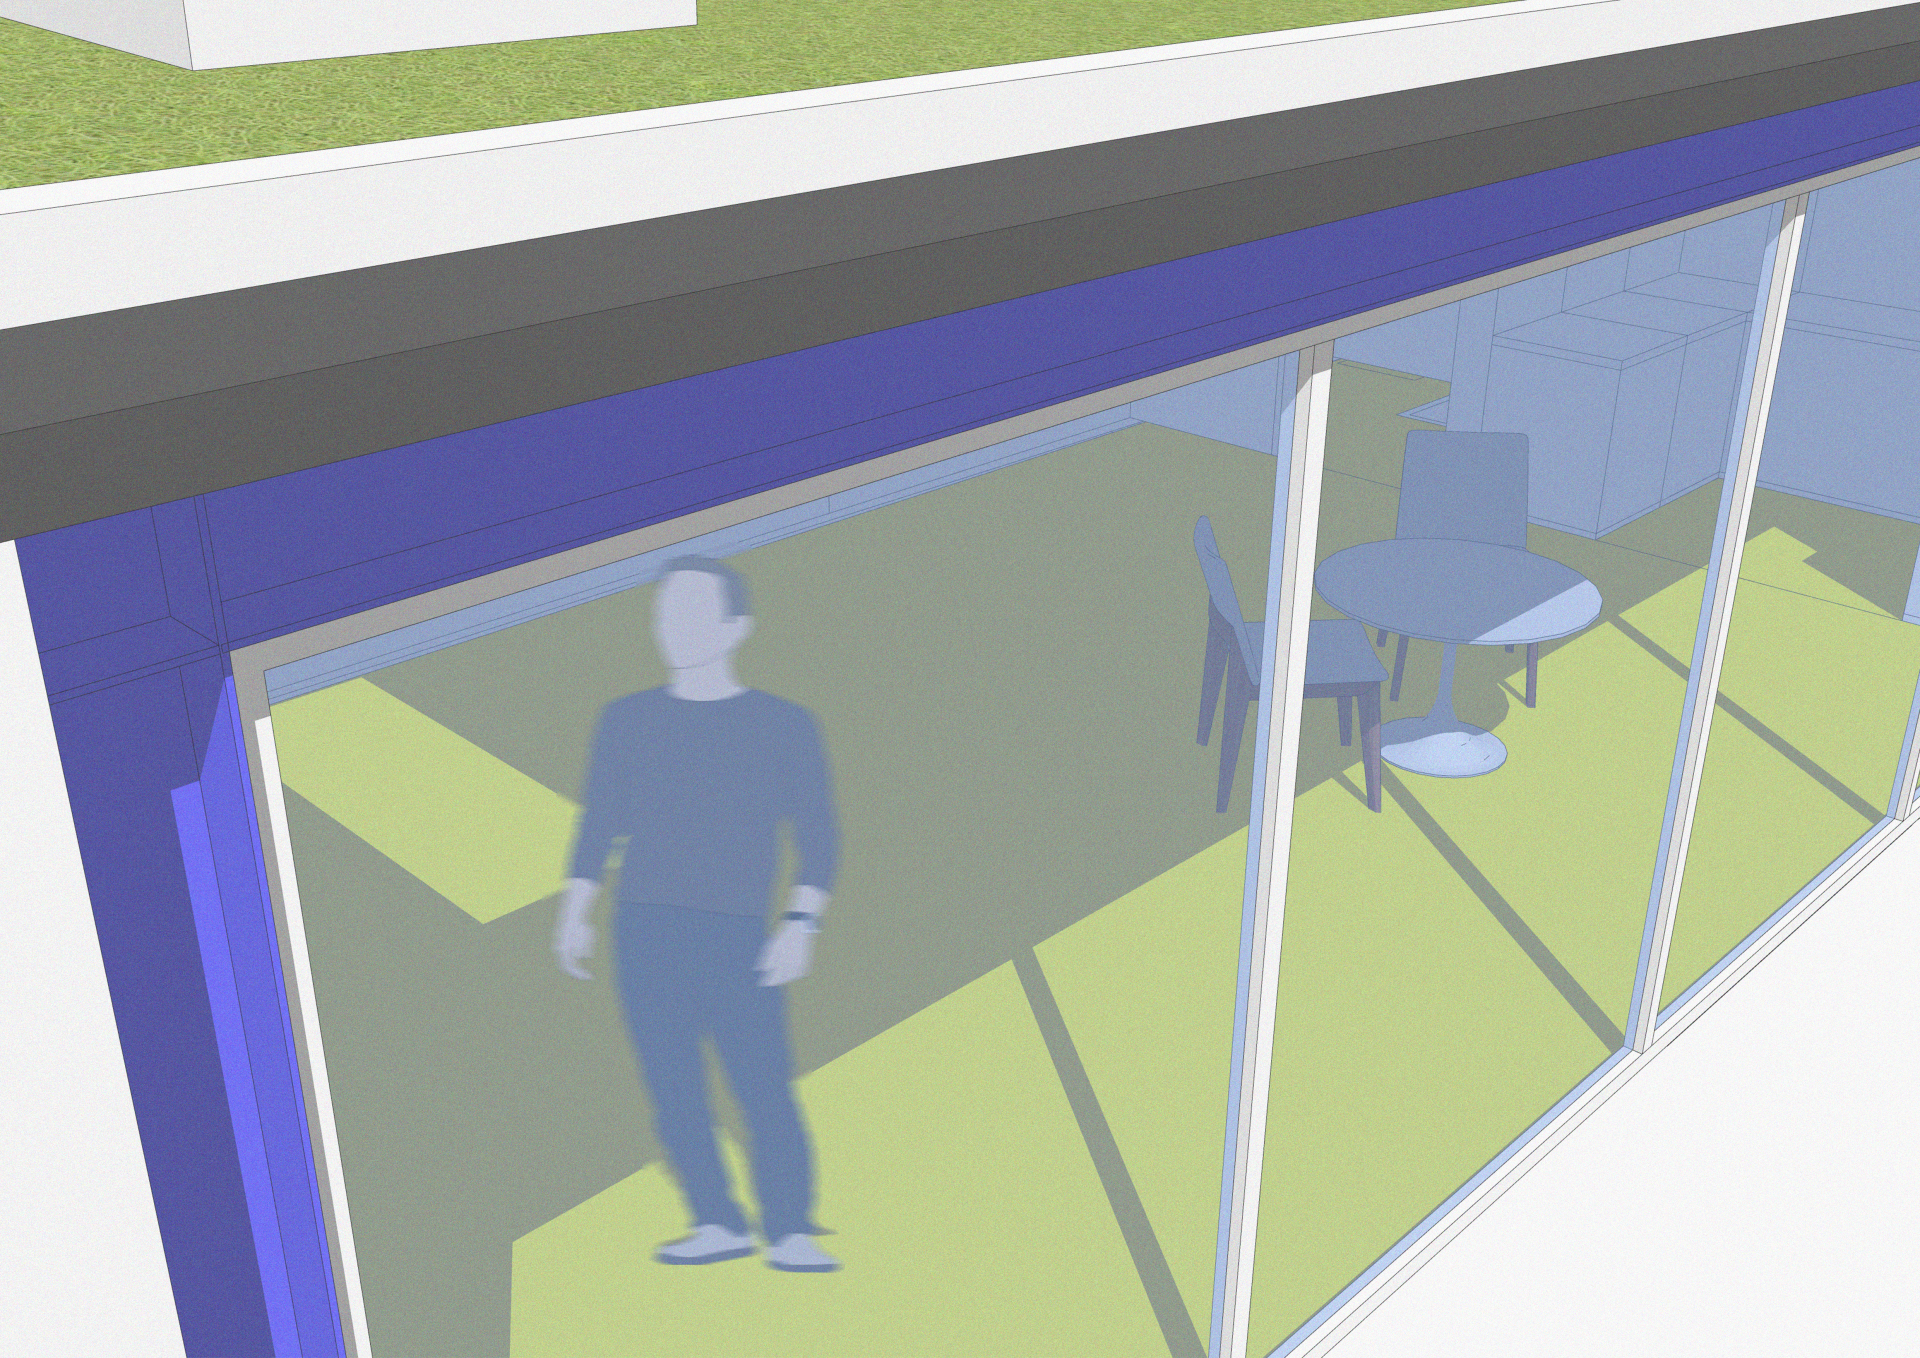 An image showing a 3D model of a studio project in Hove